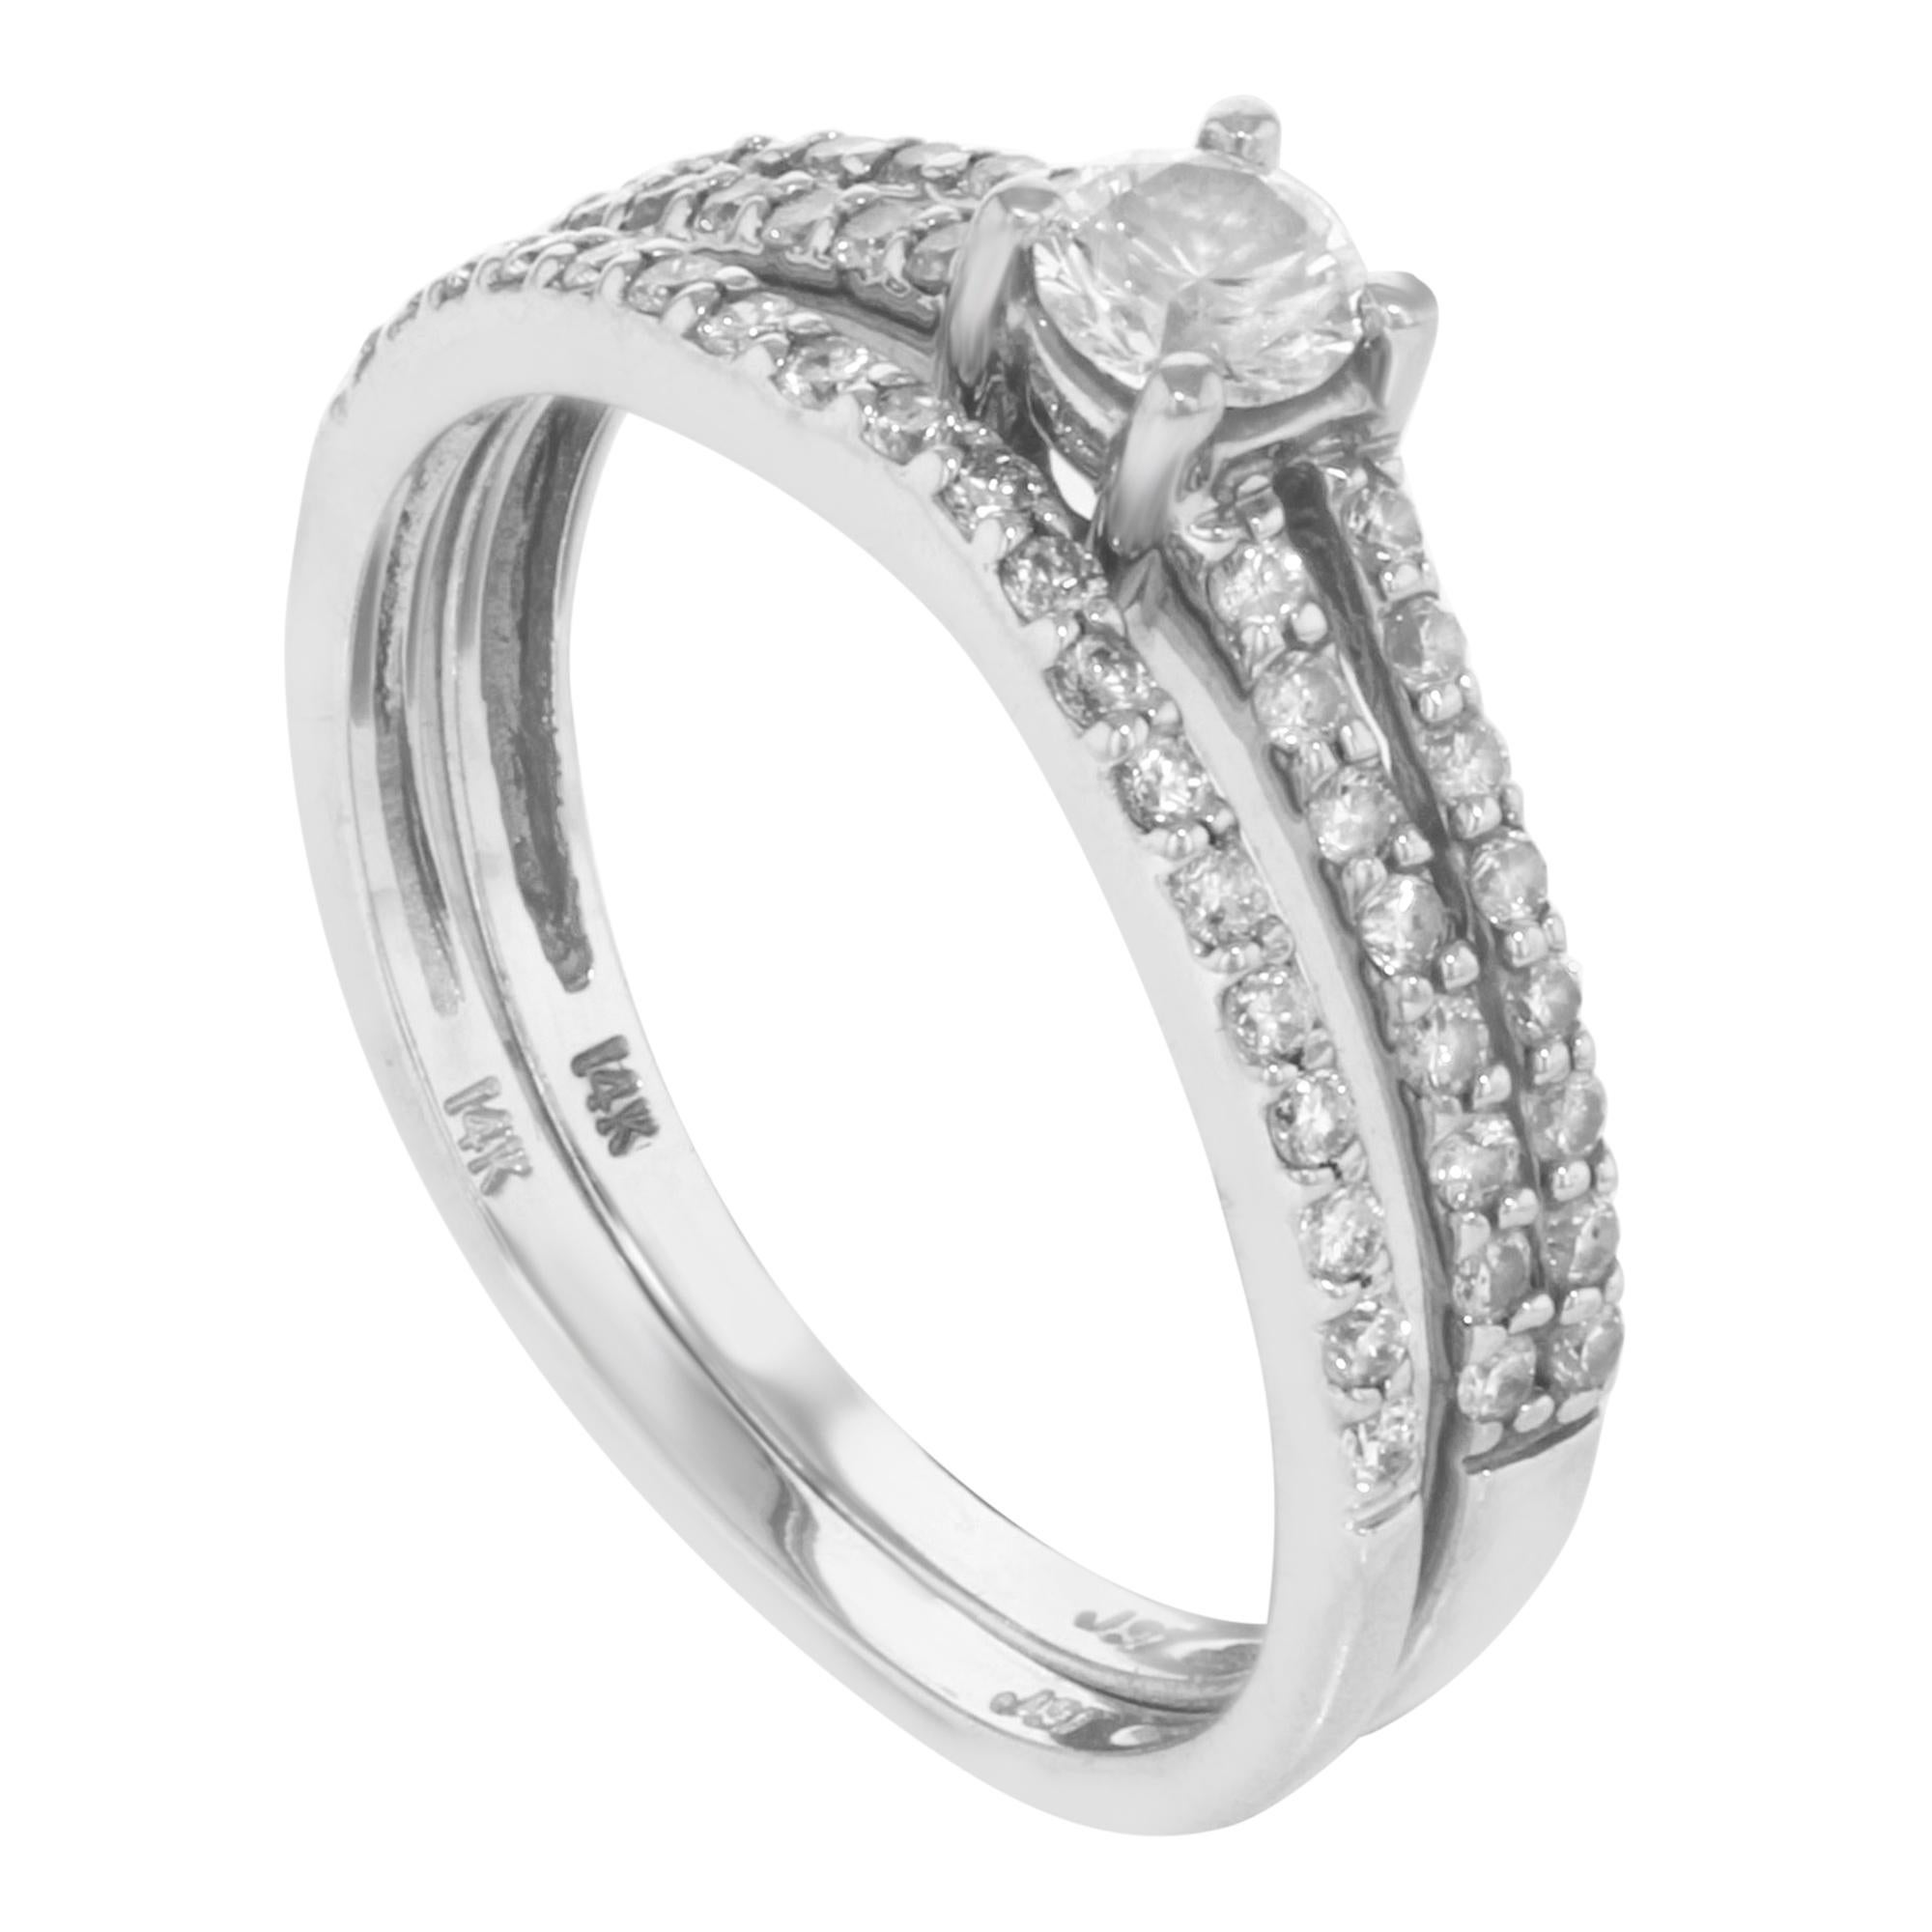 This stunning 2 piece set of rings is crafted in 14K white gold. Featuring center round cut diamond in prong setting with round cut accents stones in pave setting. Total diamond weight: 0.65 cttw. Size of the ring is 7. Total weight 3.2 g. Comes